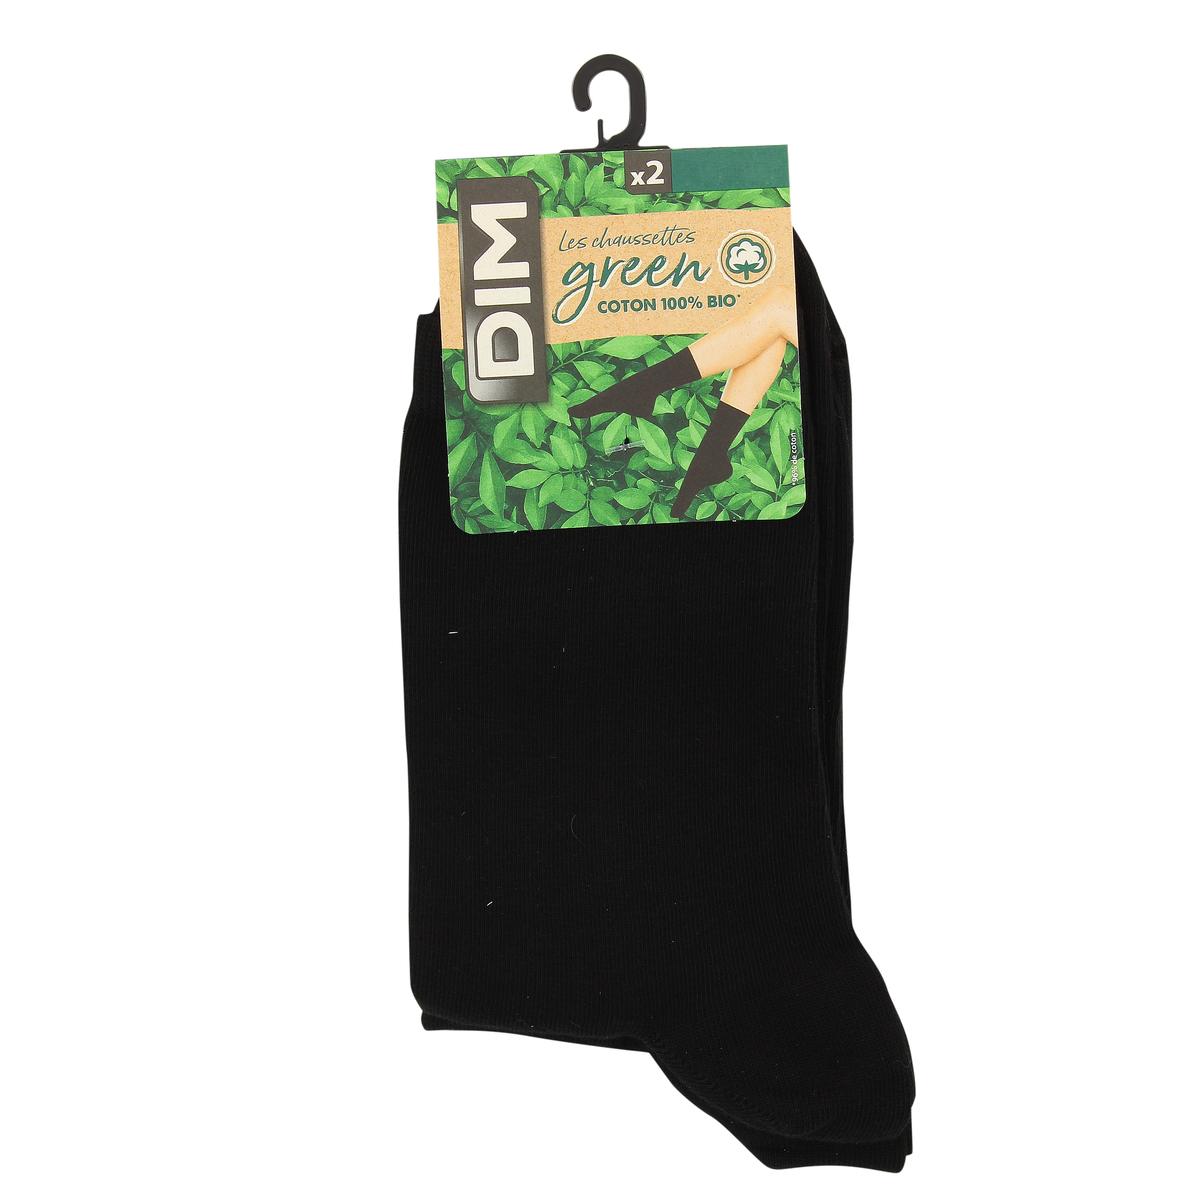 Bata Chaussettes Cool MS 2, Taille 35-38